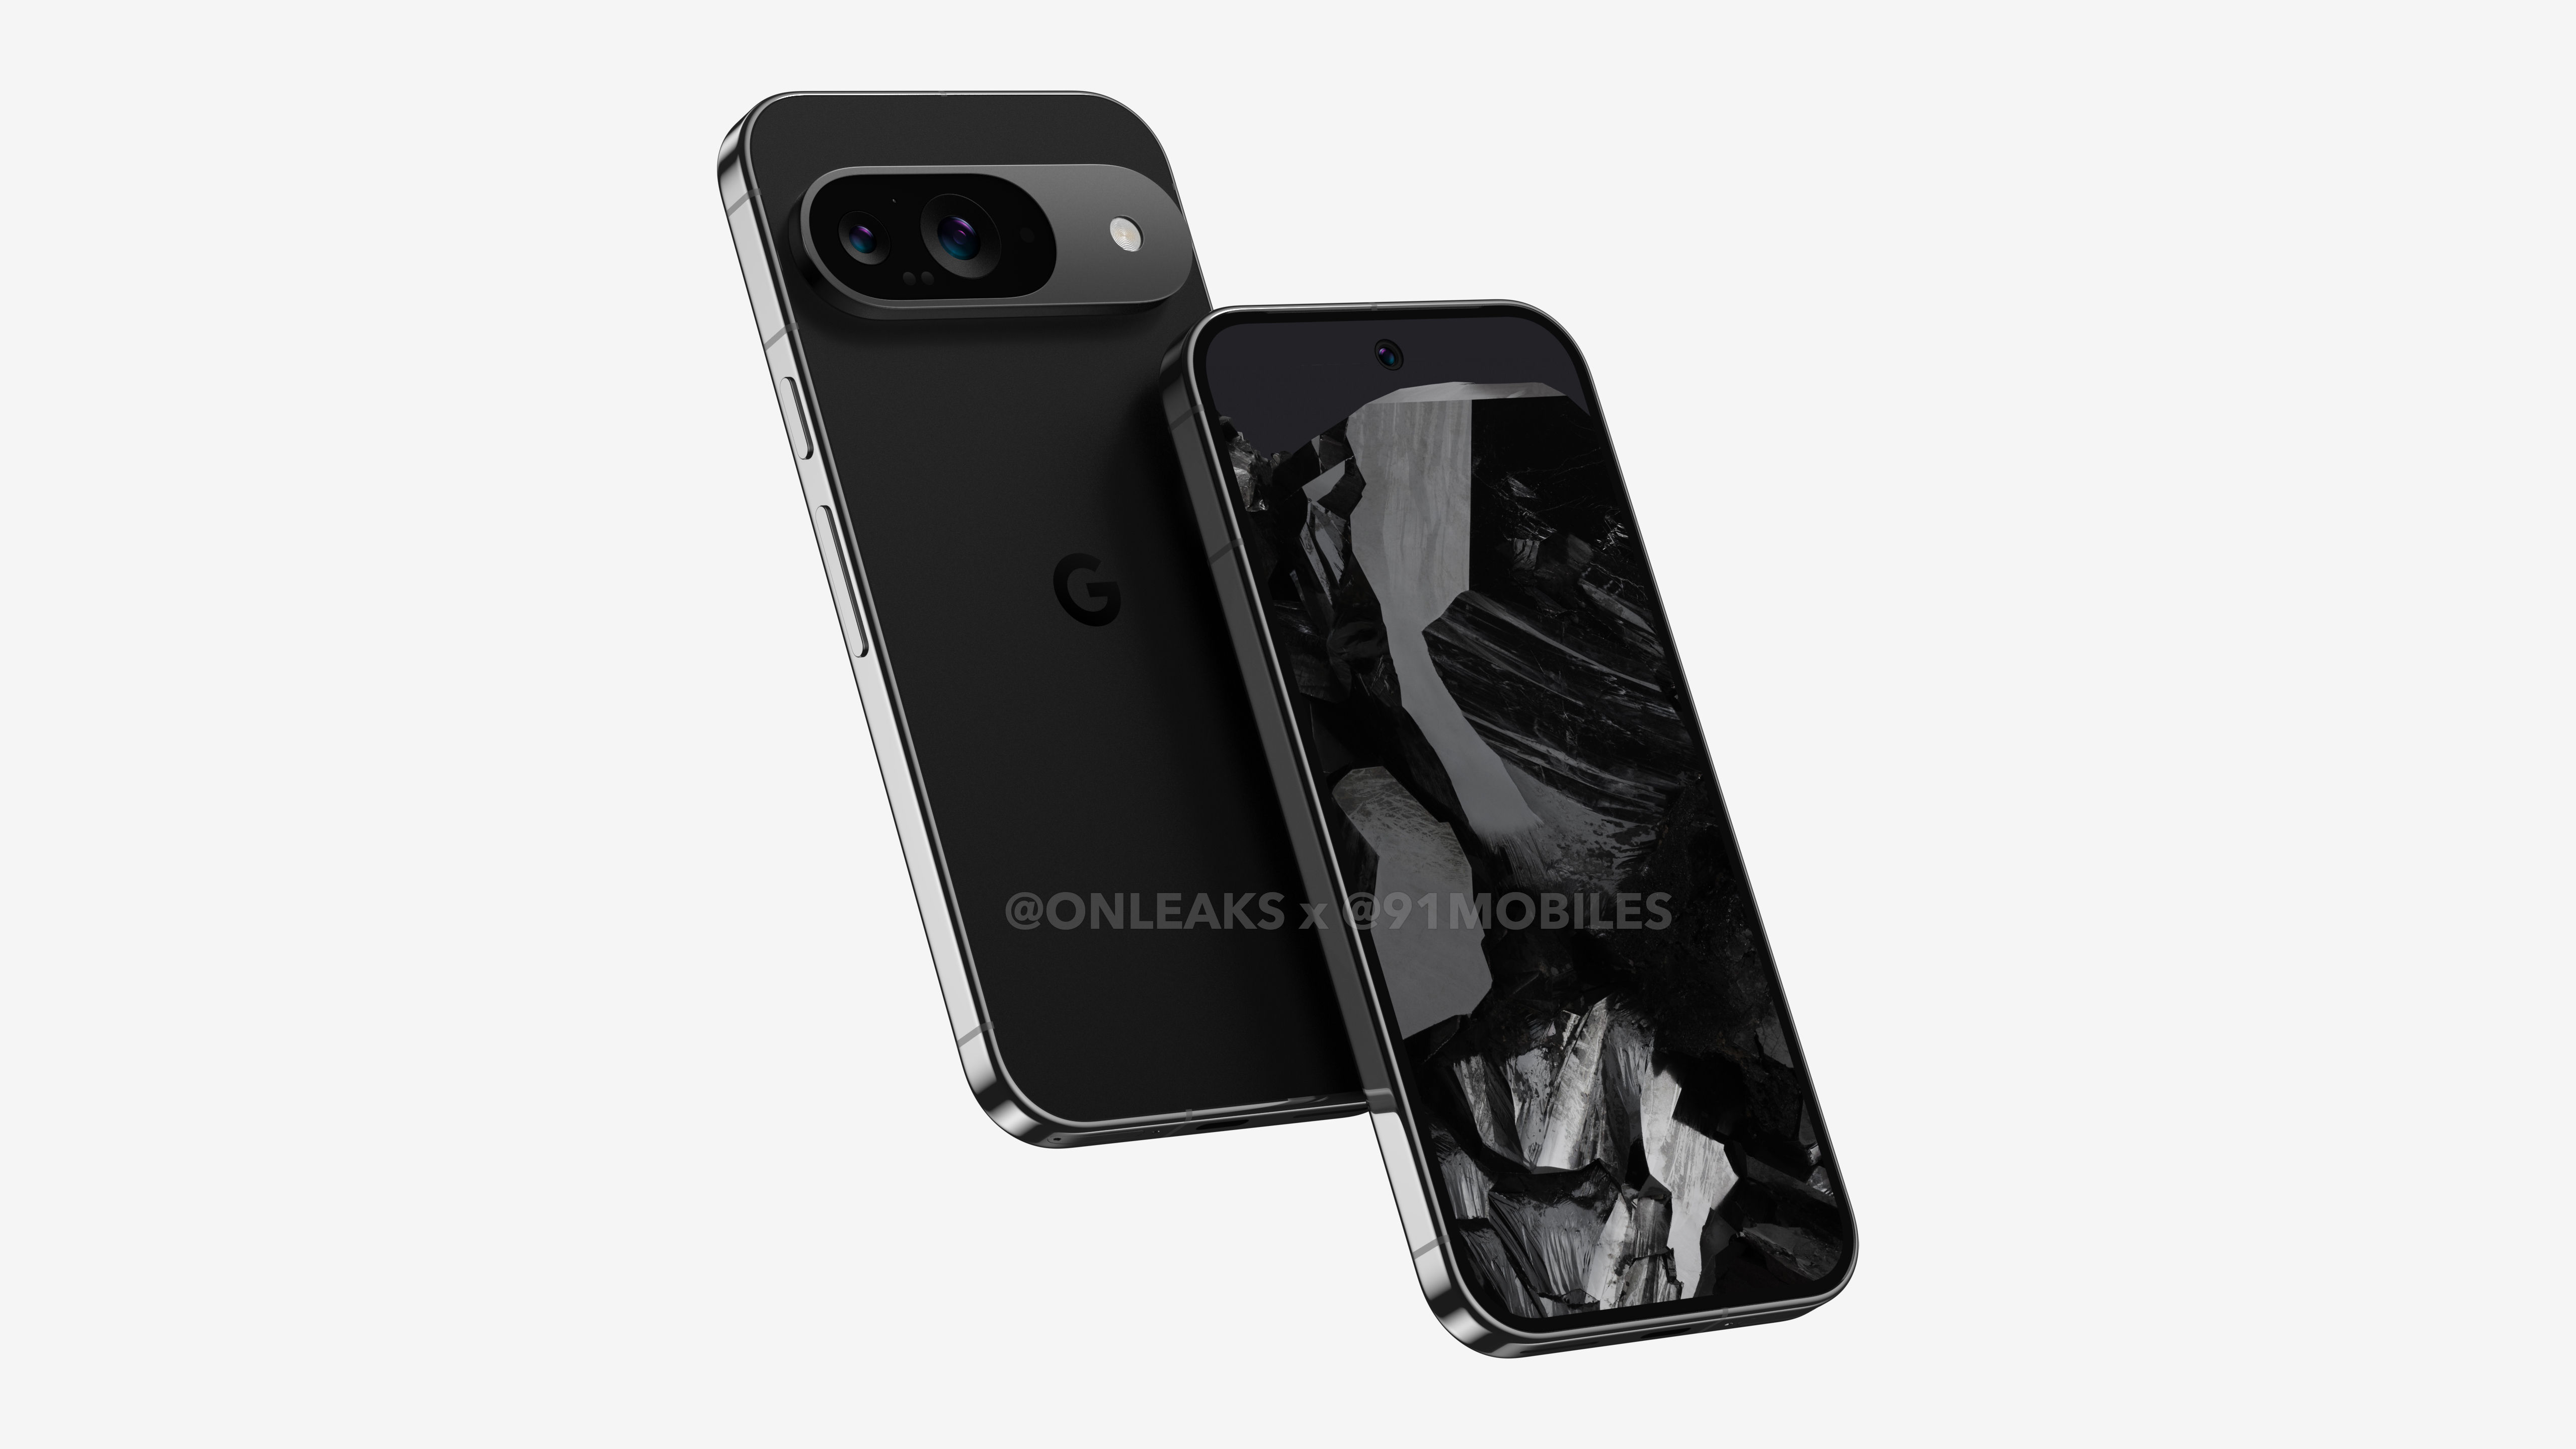 Pixel 9, Pixel 9 Pro and Pixel 9 Pro XL: there will be three models in Google's new flagship smartphone line-up